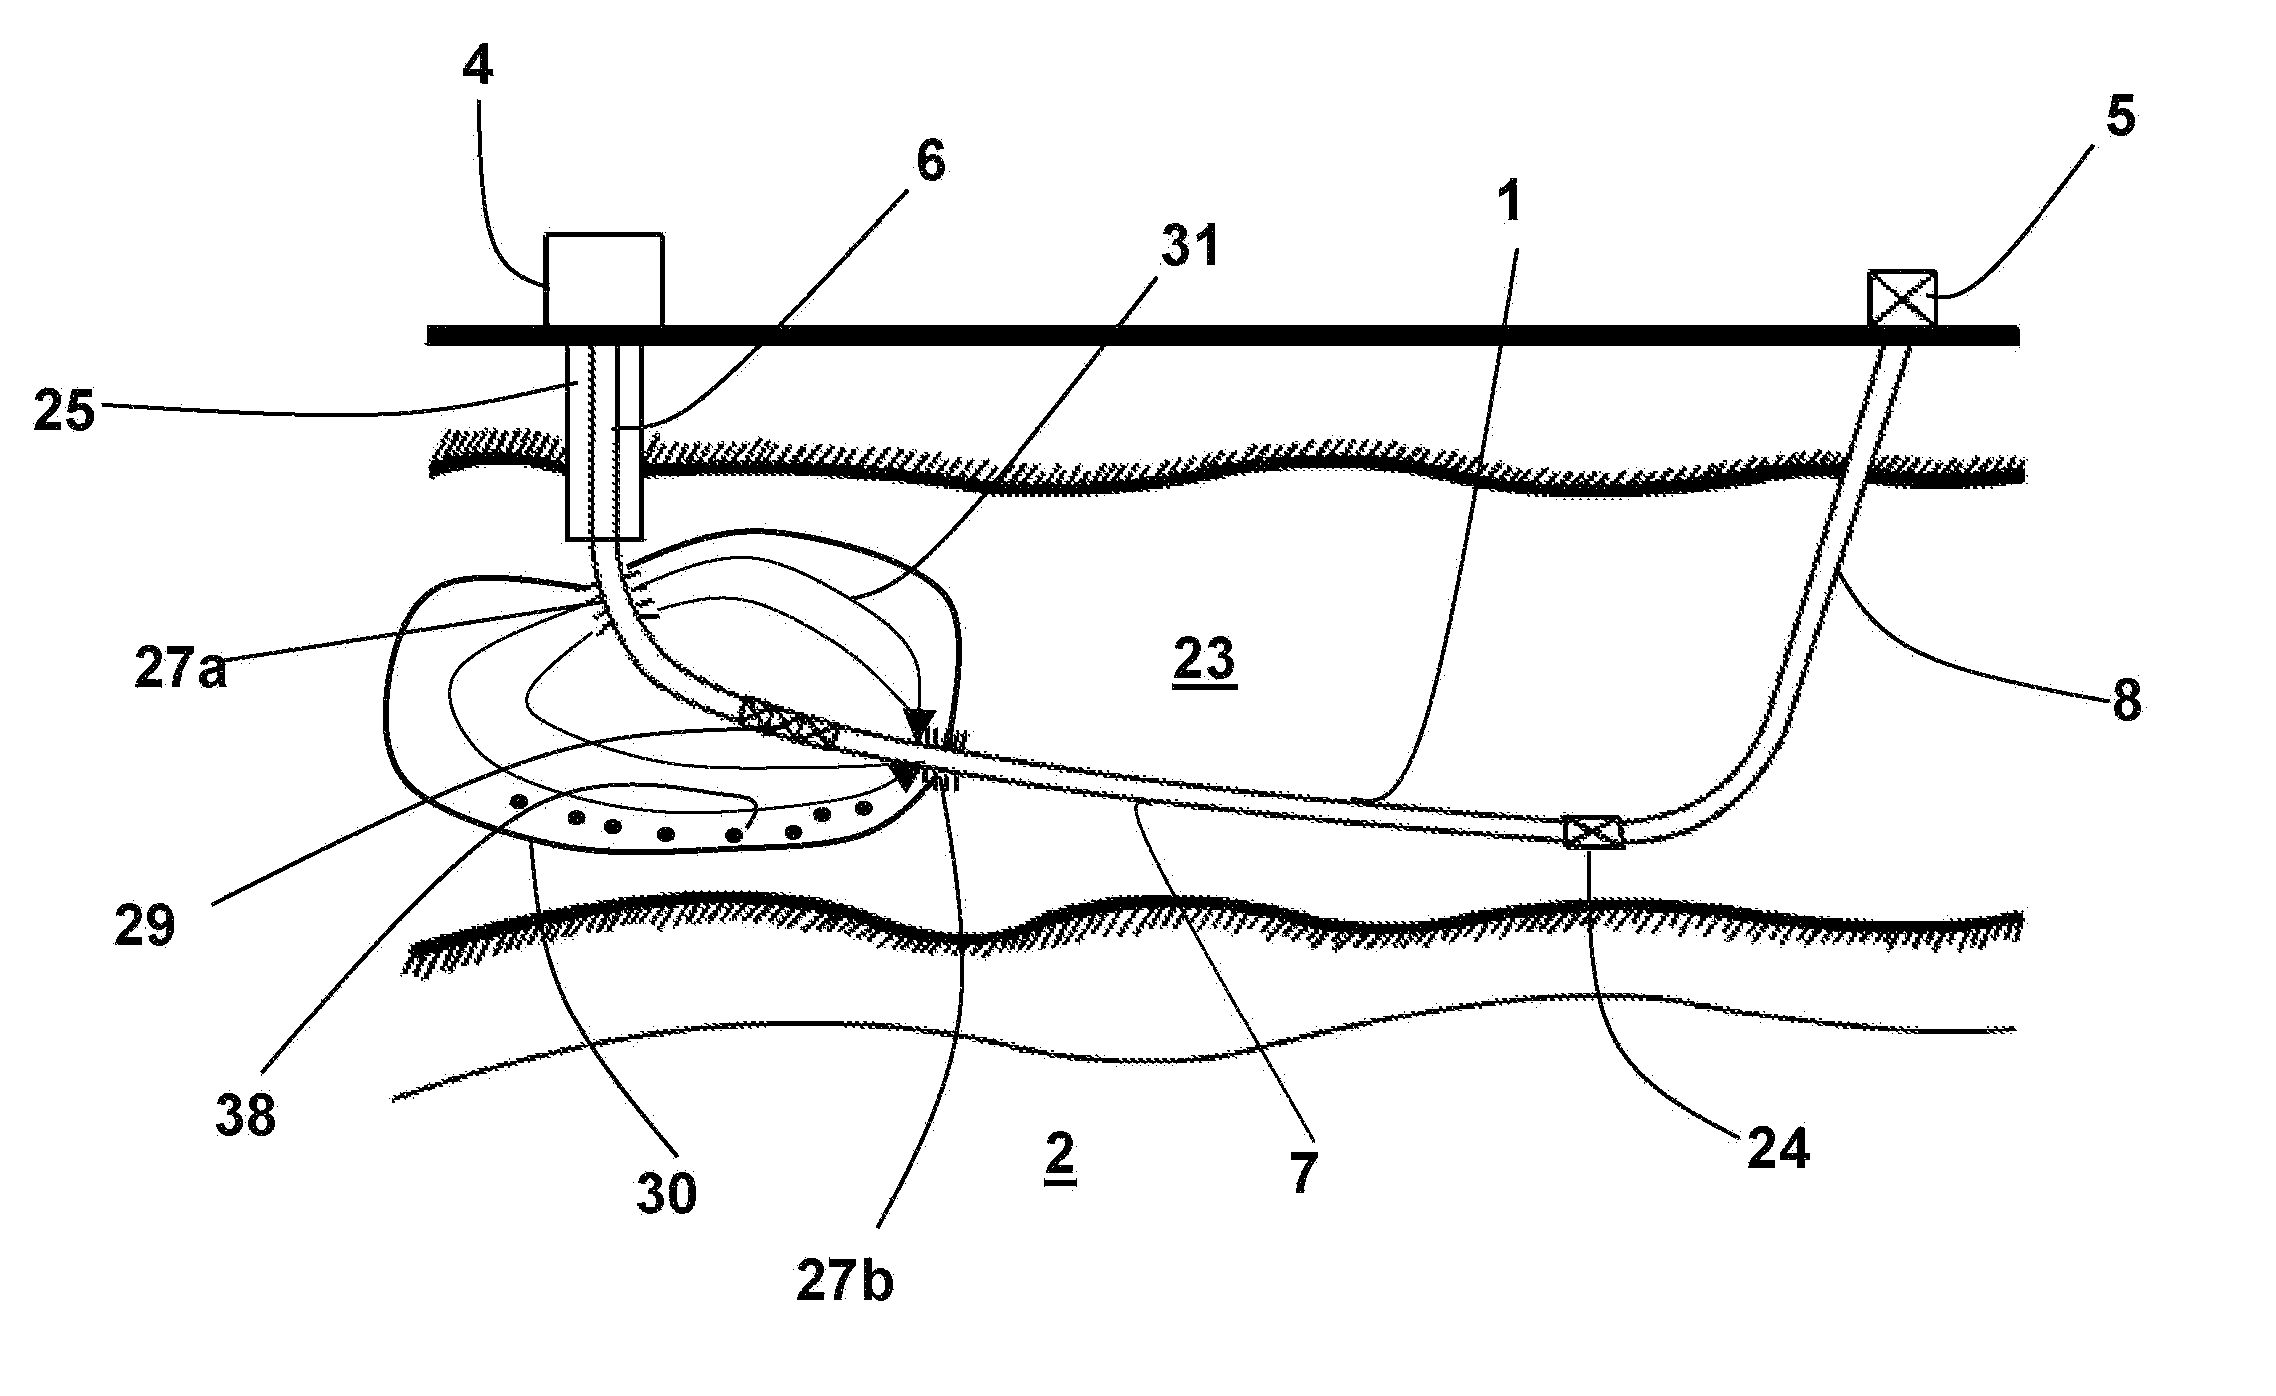 Method for Recovering Hydrocarbons from Subterranean Formations